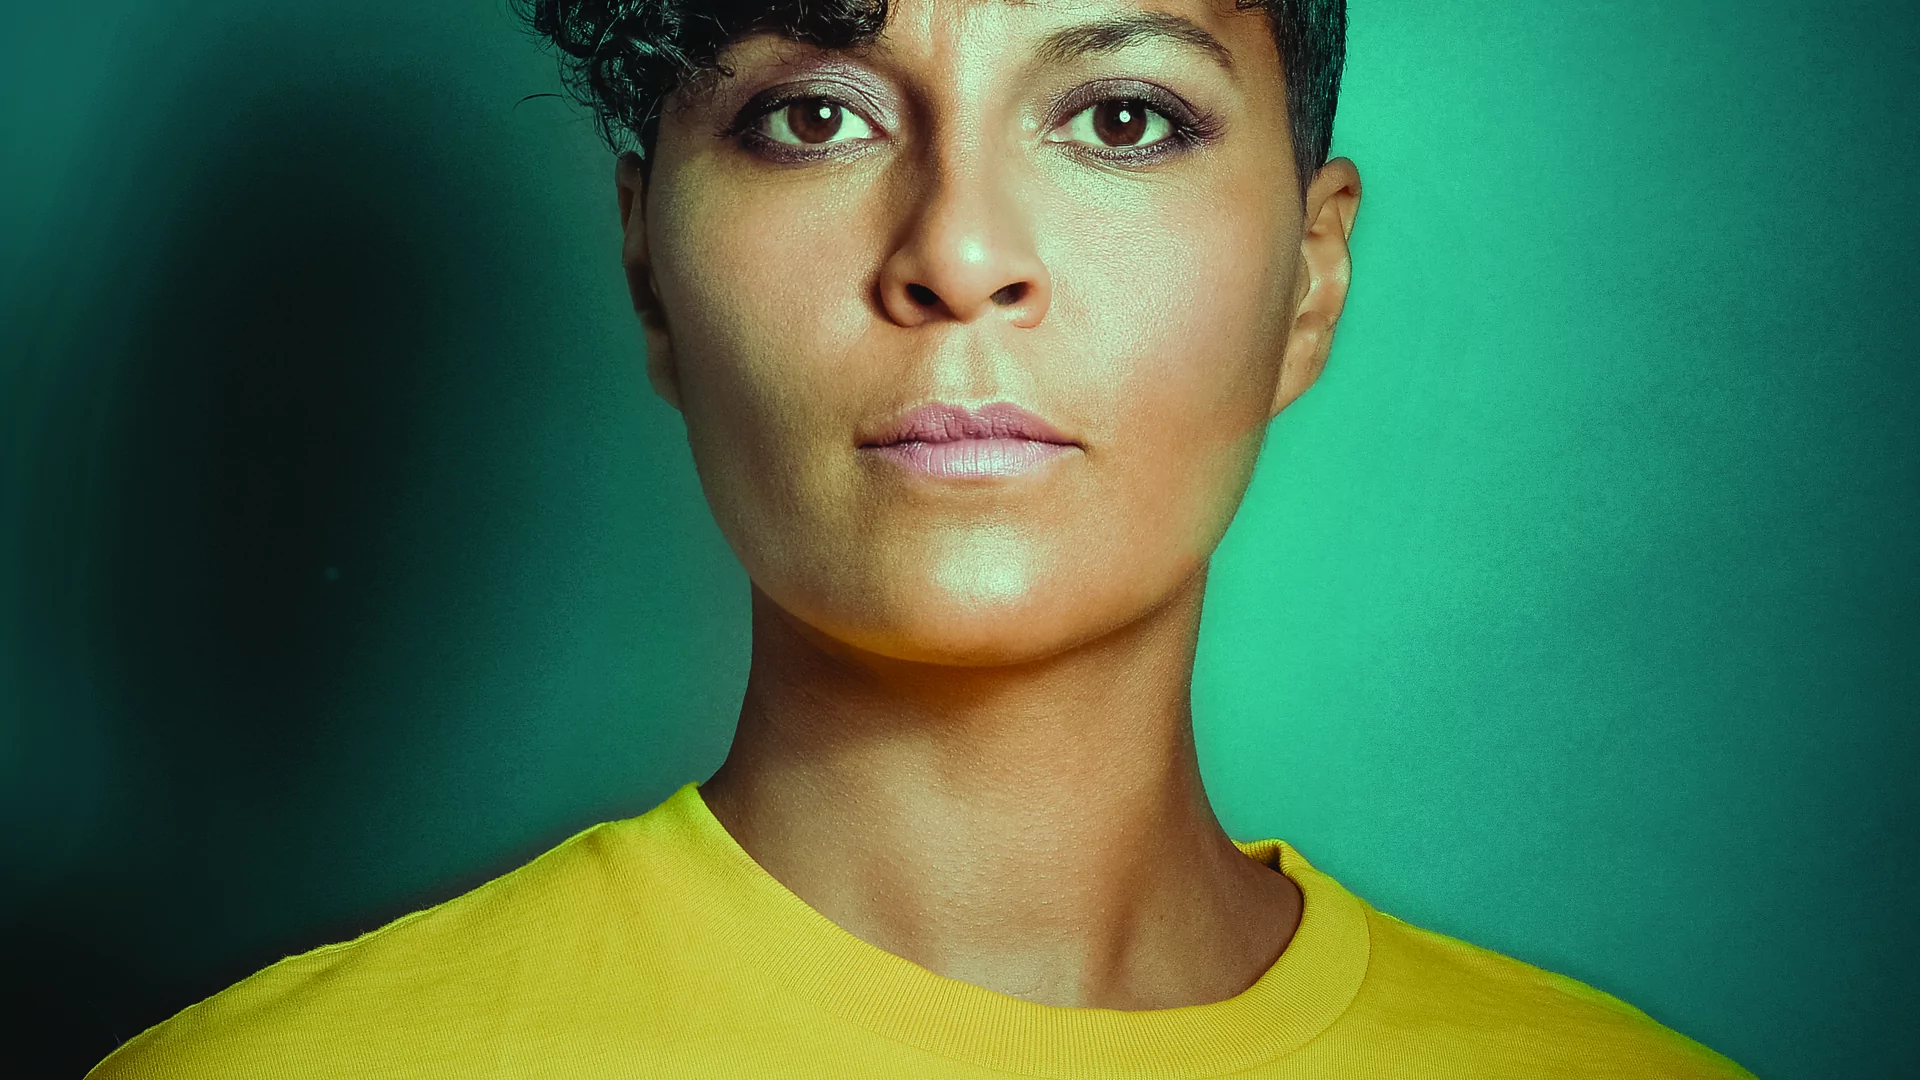 Virginia poses in a portrait image wearing a yellow top